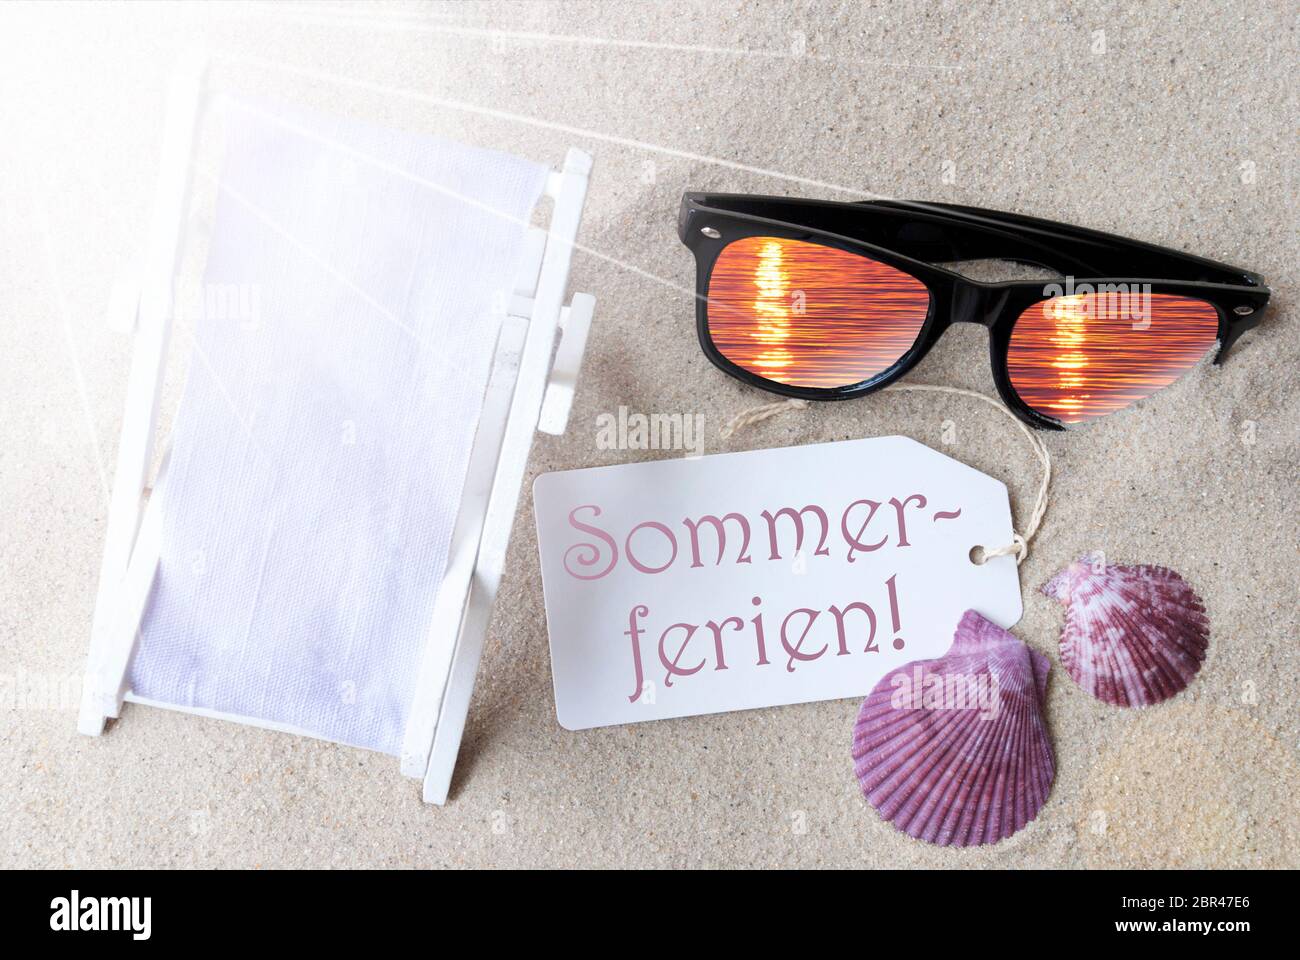 Sunny Summer Label With German Text  Sommerferien Means Summer Holidays. Flat Lay View. Summer Decoration With Deck Chair, Seashells And Sunglasses. G Stock Photo